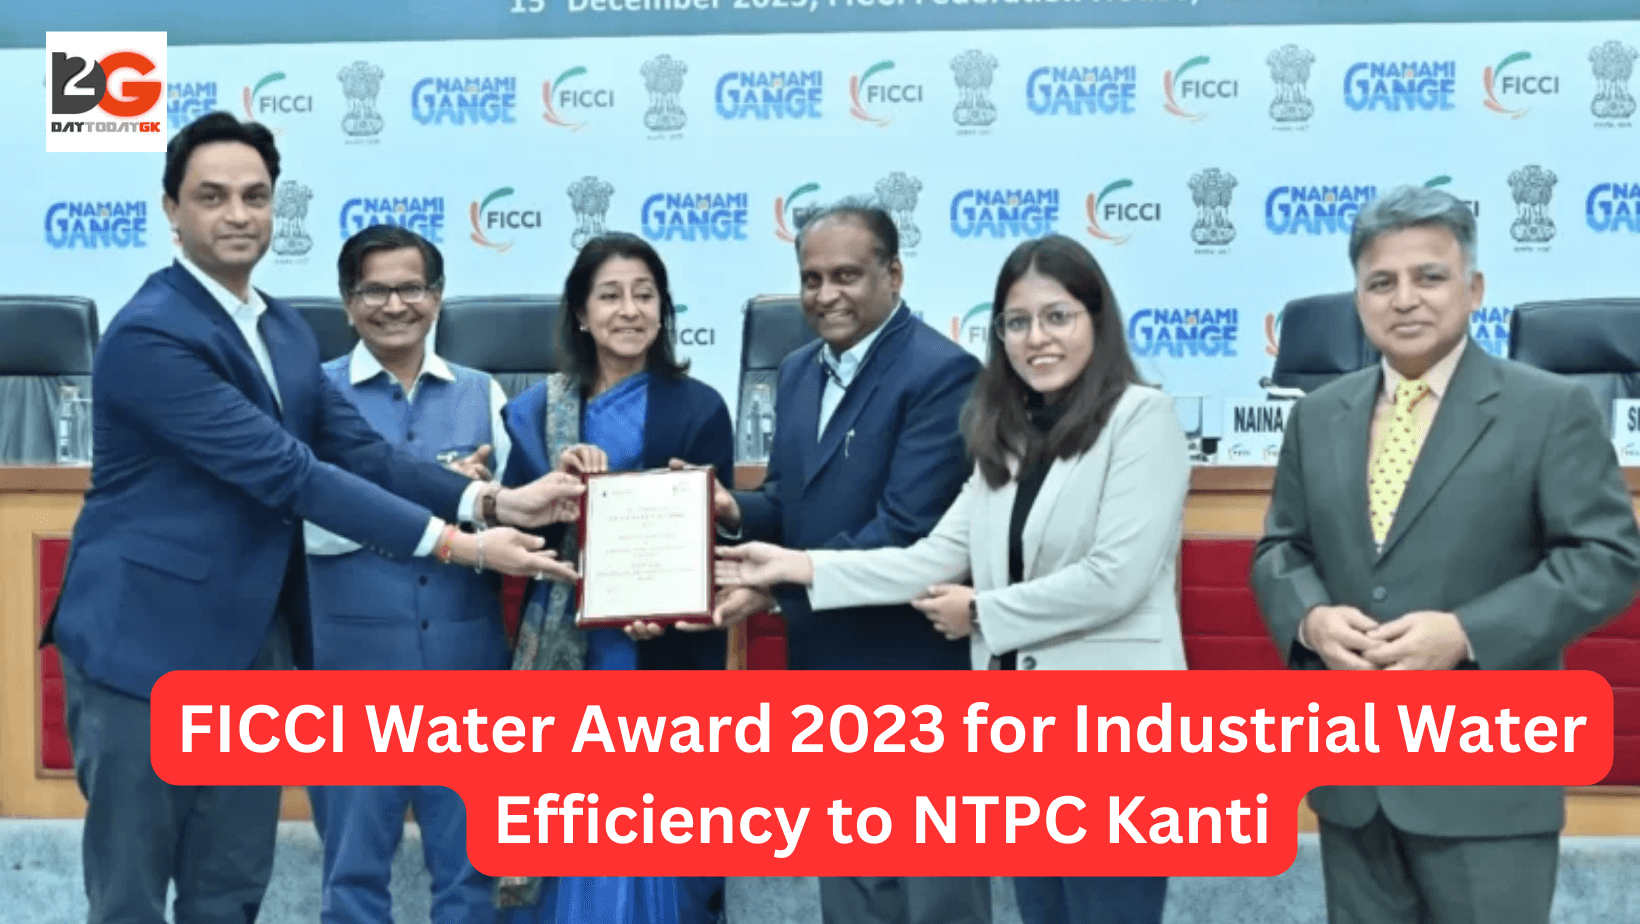 FICCI Water Award 2023 for Industrial Water Efficiency to NTPC Kanti